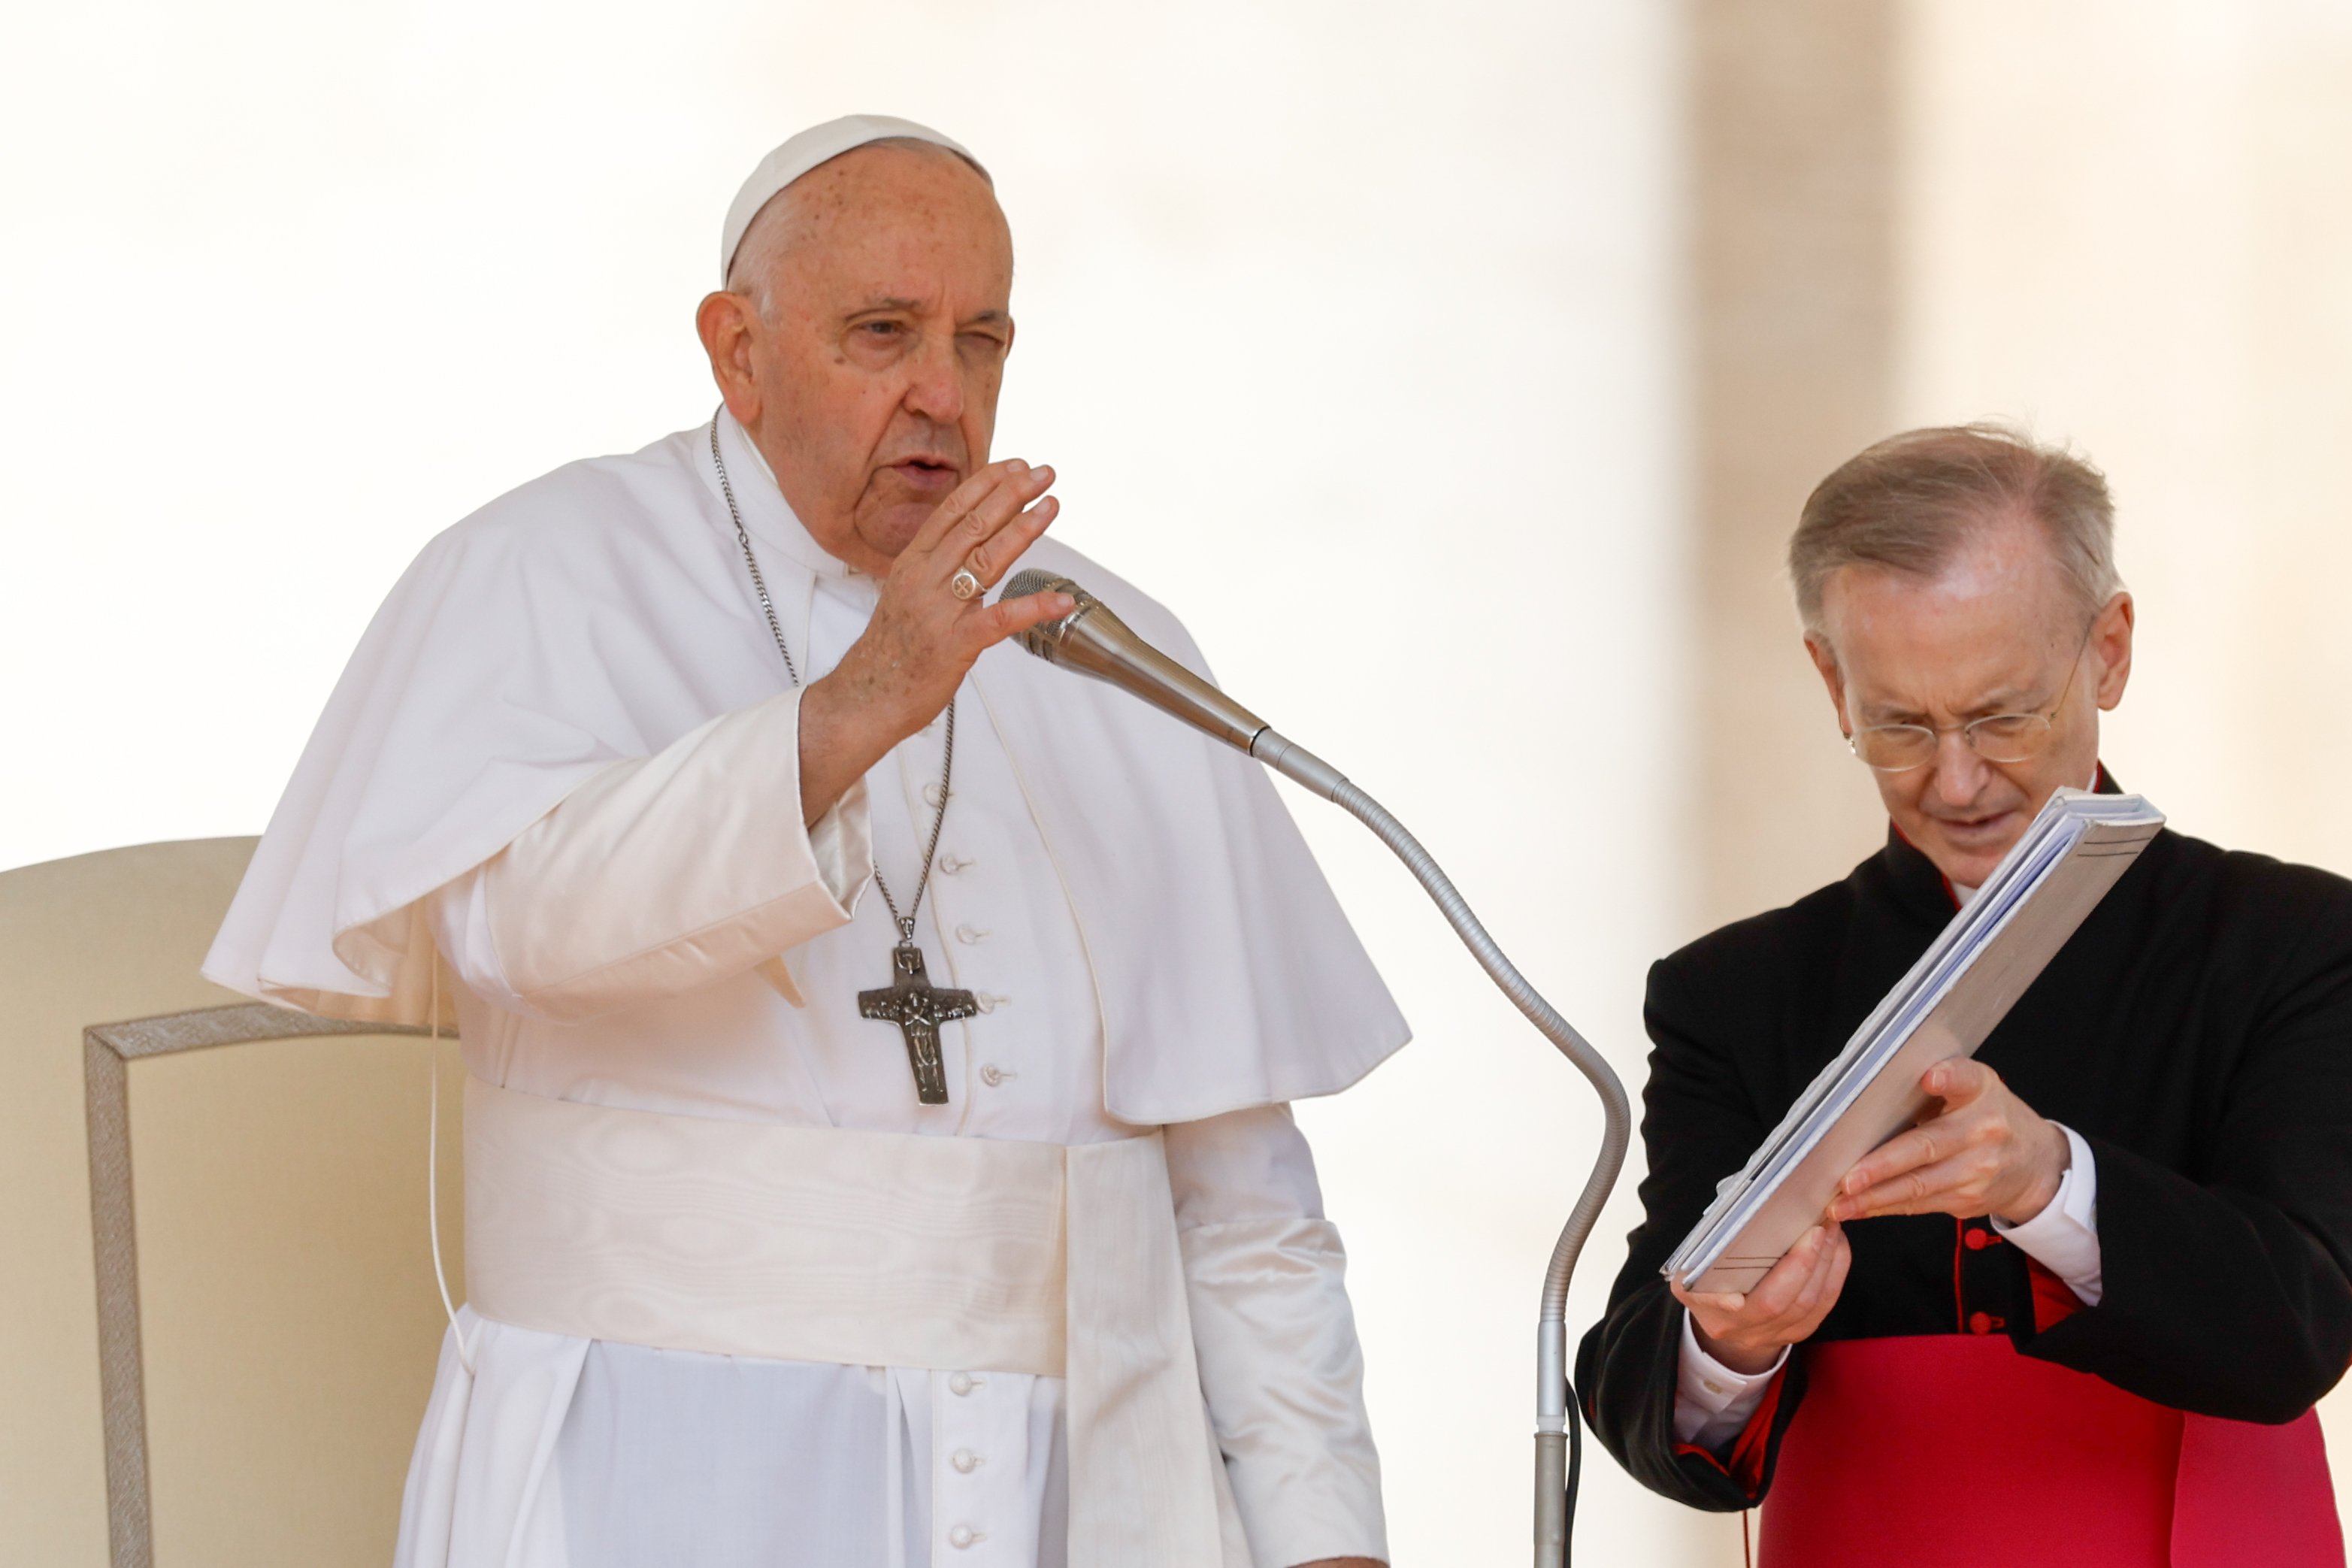 Pope Francis gives a blessing.